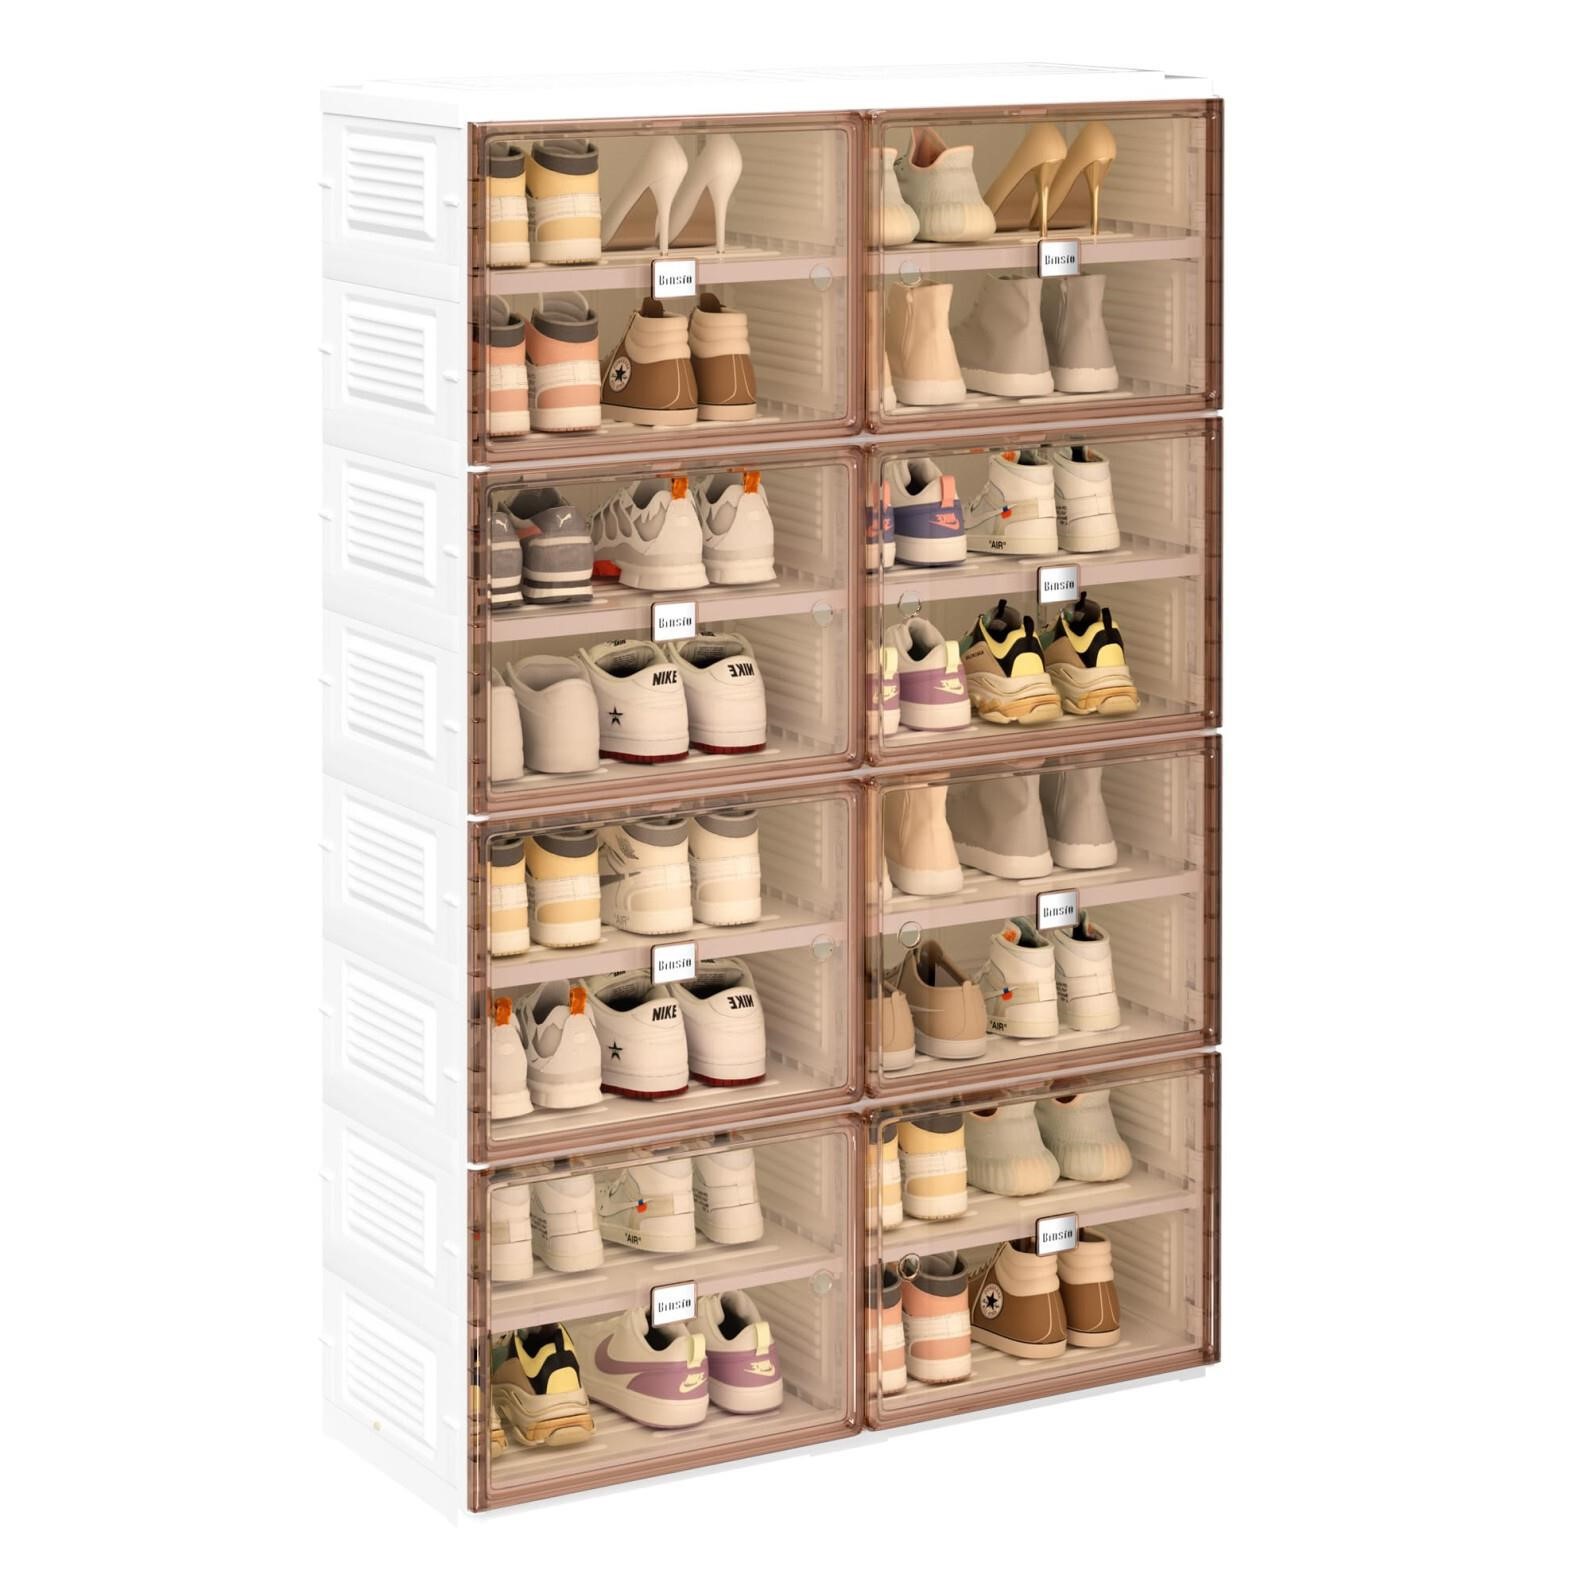 BINSIO Collapsible Shoe Rack Closet Organizers and